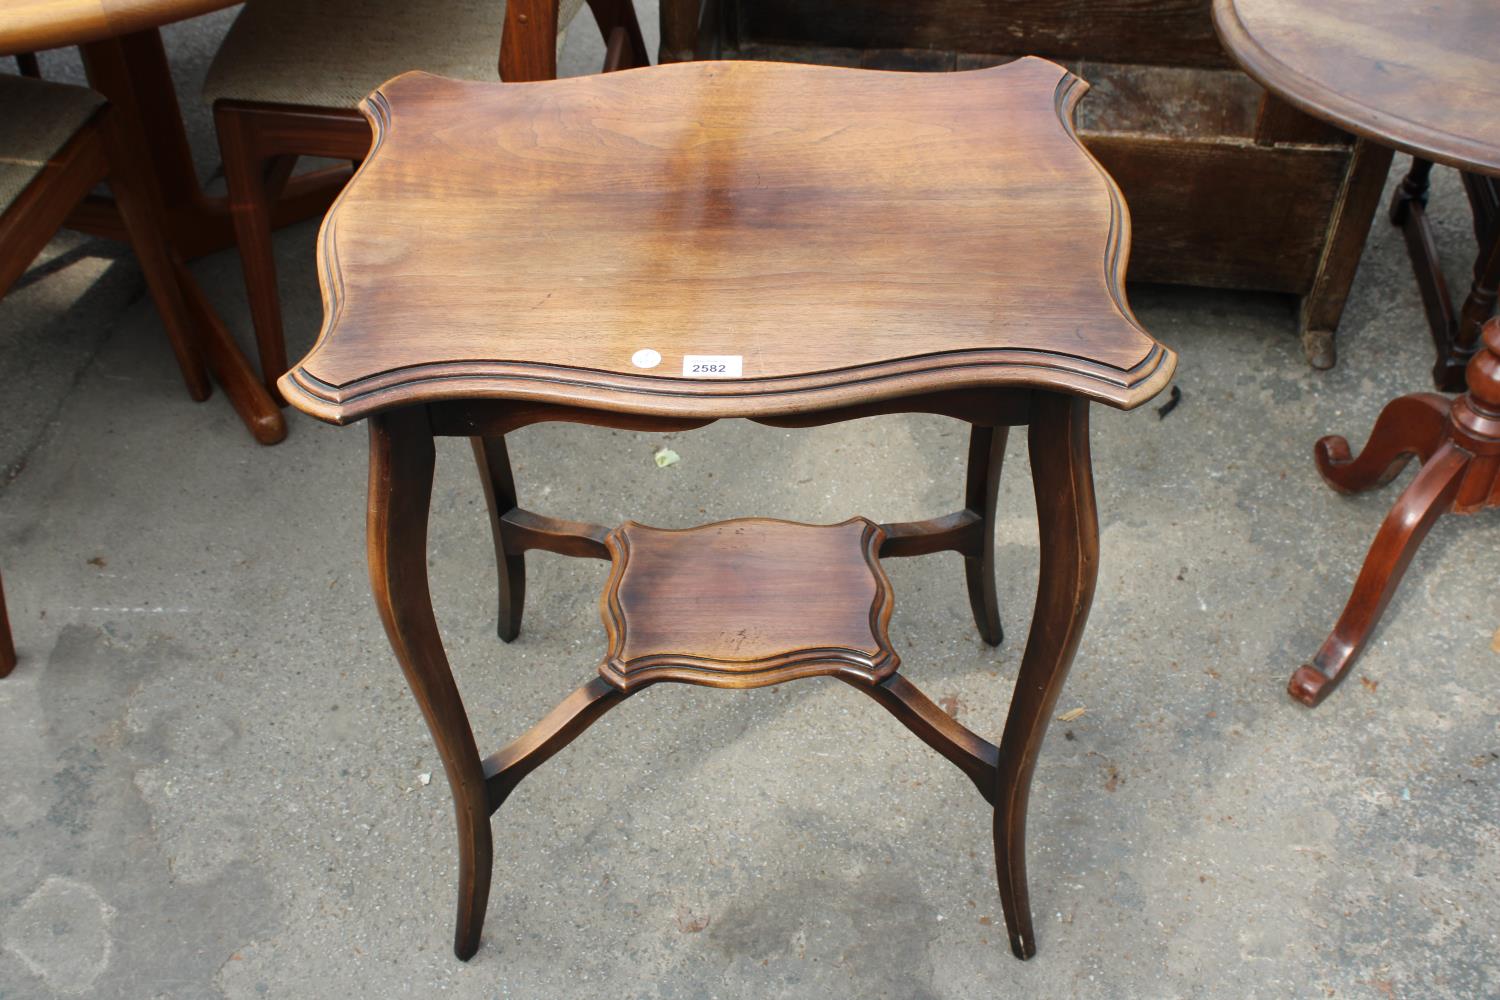 AN EDWARDIAN TWO TIER MAHOGANY OCCASIONAL TABLE, 24" X 18"